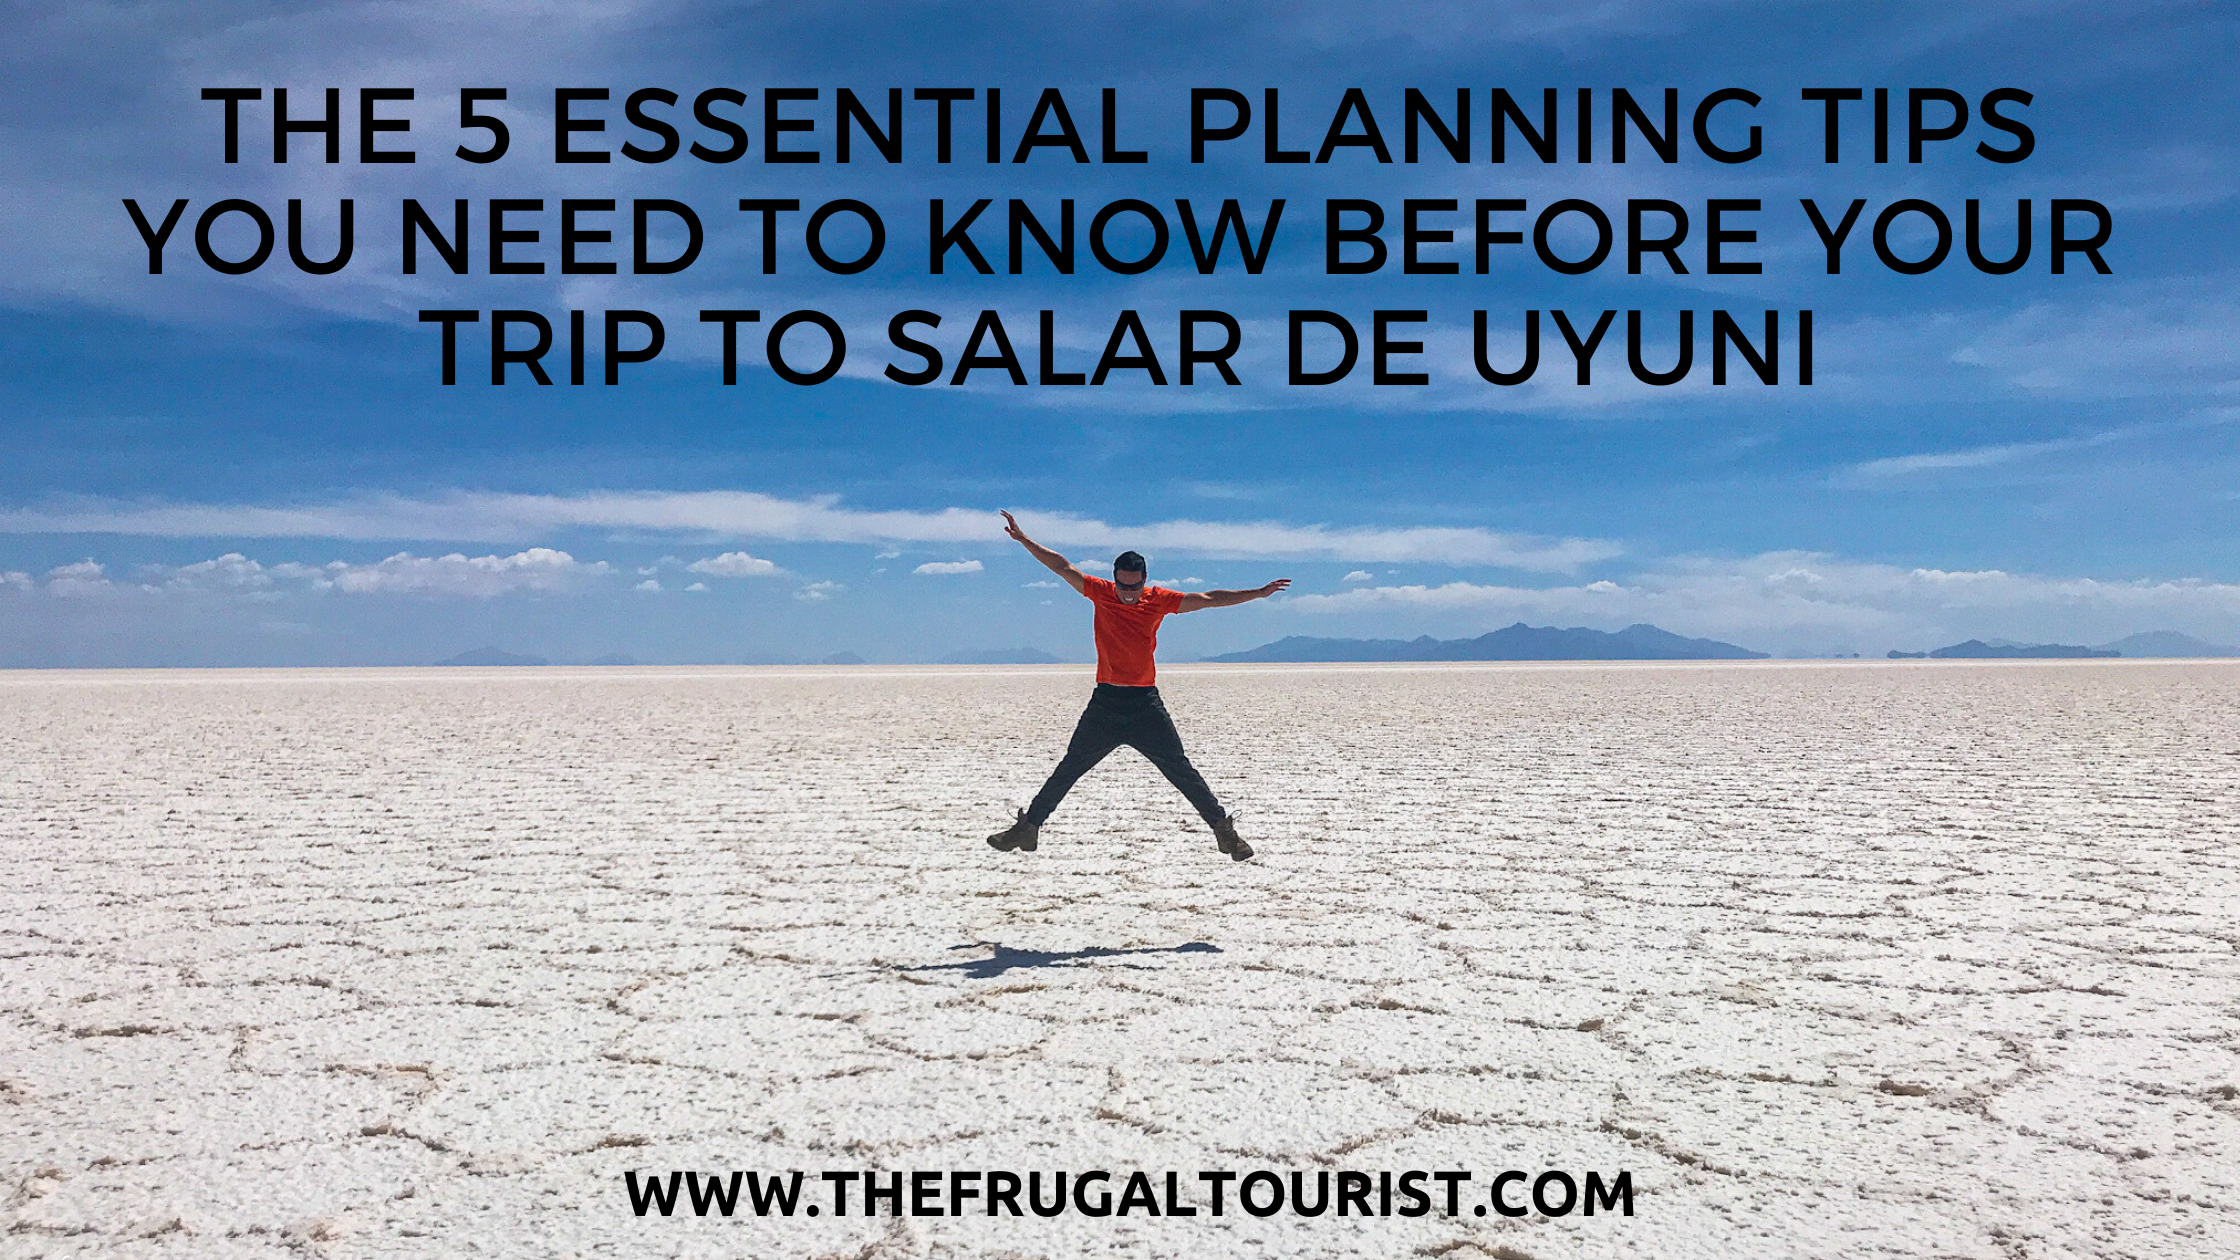 5 ESSENTIAL PLANNING TIPS YOU NEED TO KNOW BEFORE YOUR TRIP TO SALAR DE UYUNI